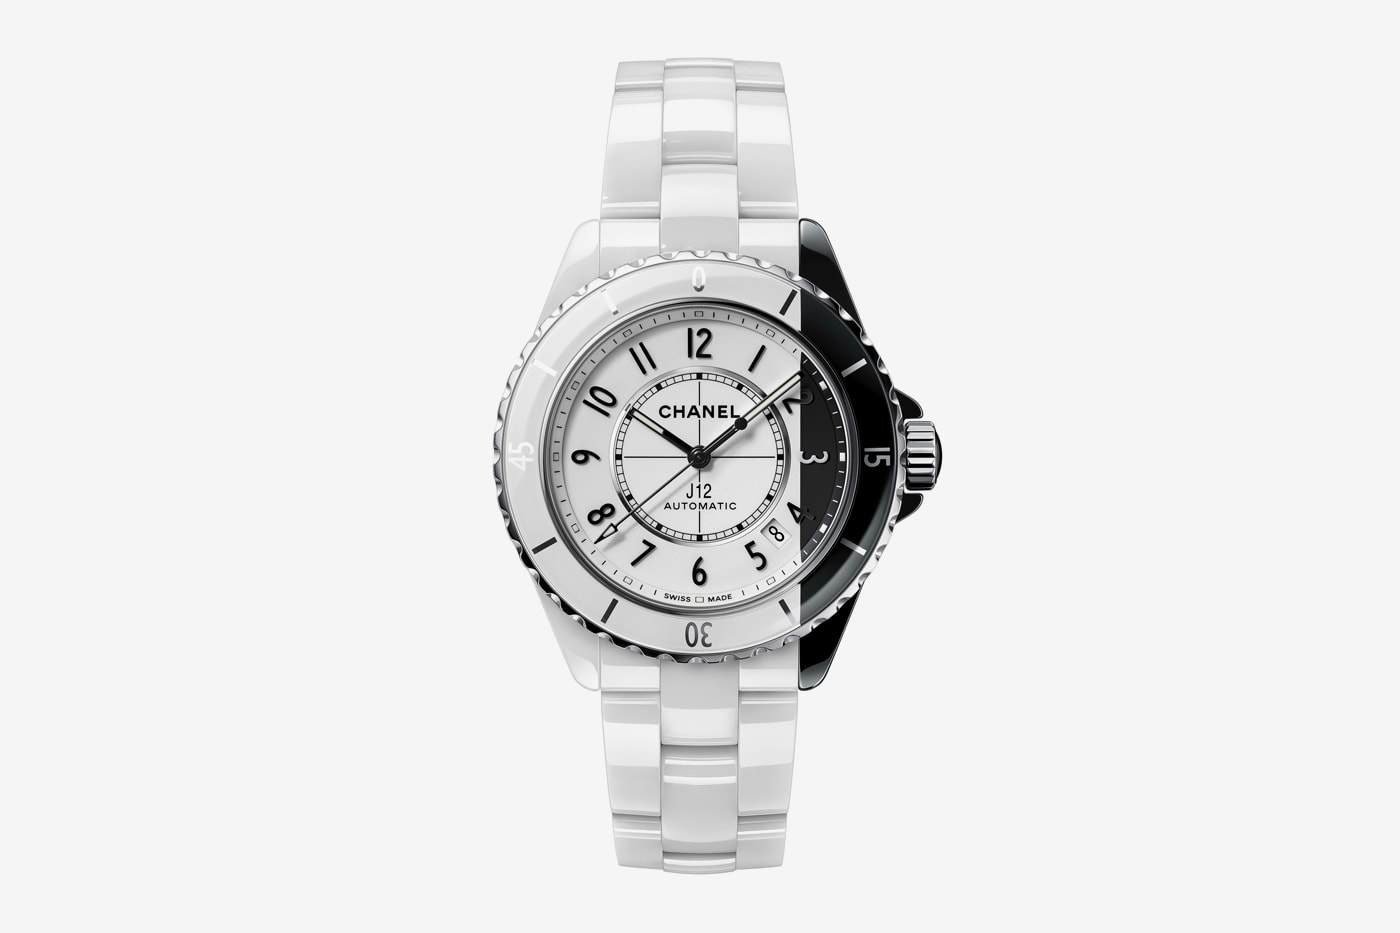 Insider: Chanel J12 ref. H0970. An Iconic Women's Watch. — WATCH COLLECTING  LIFESTYLE